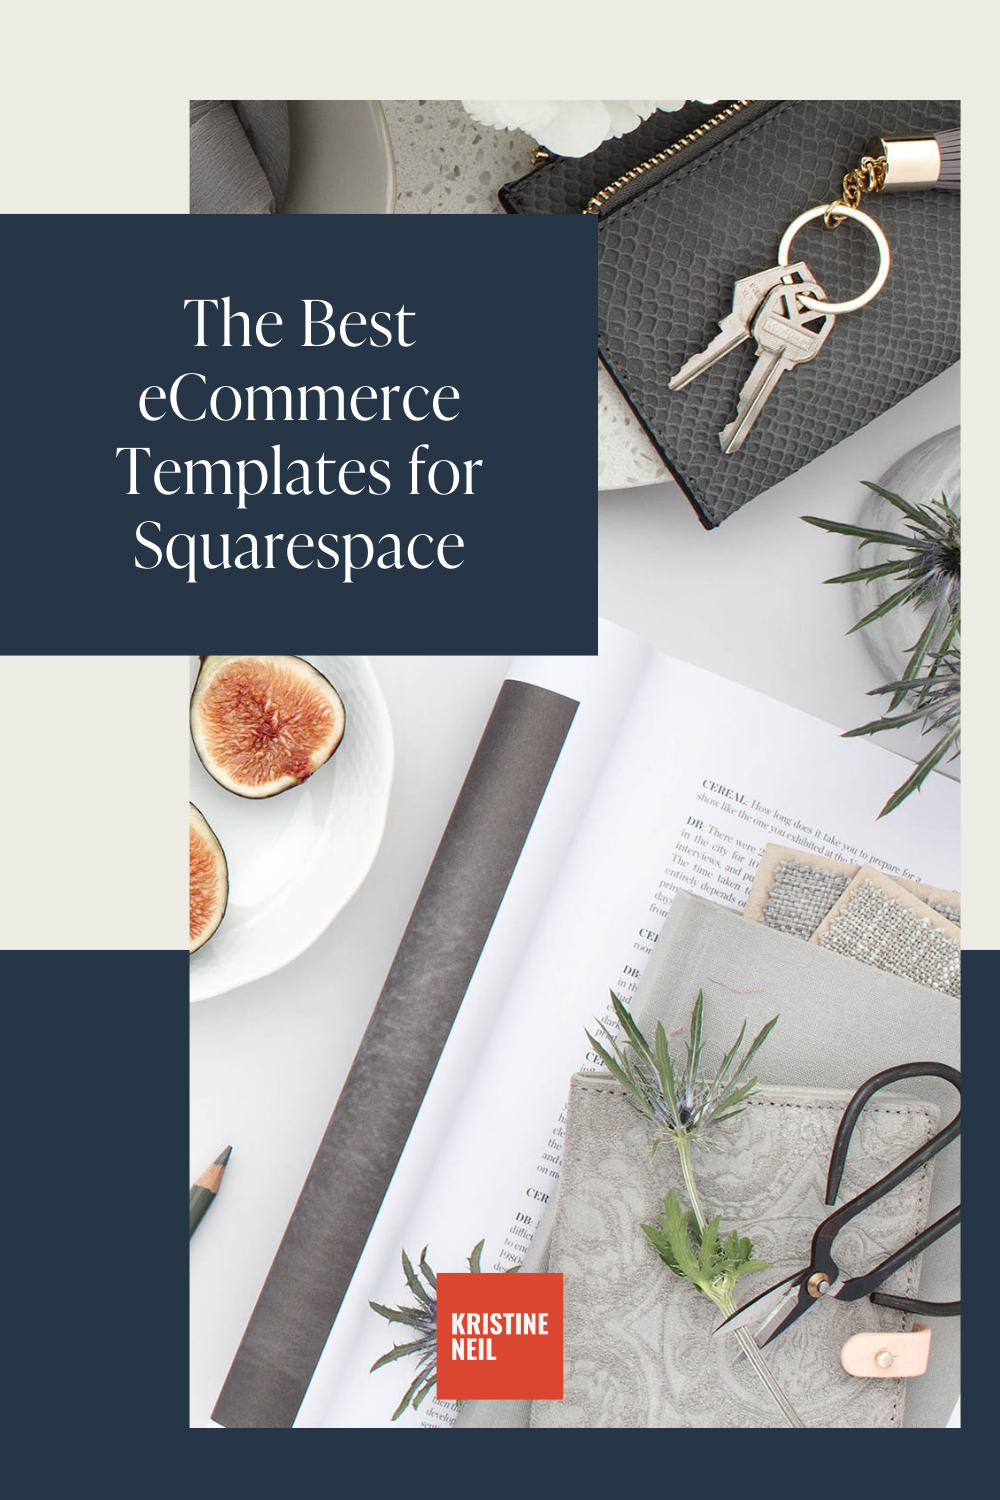 the-best-ecommerce-templates-for-squarespace-kristine-neil